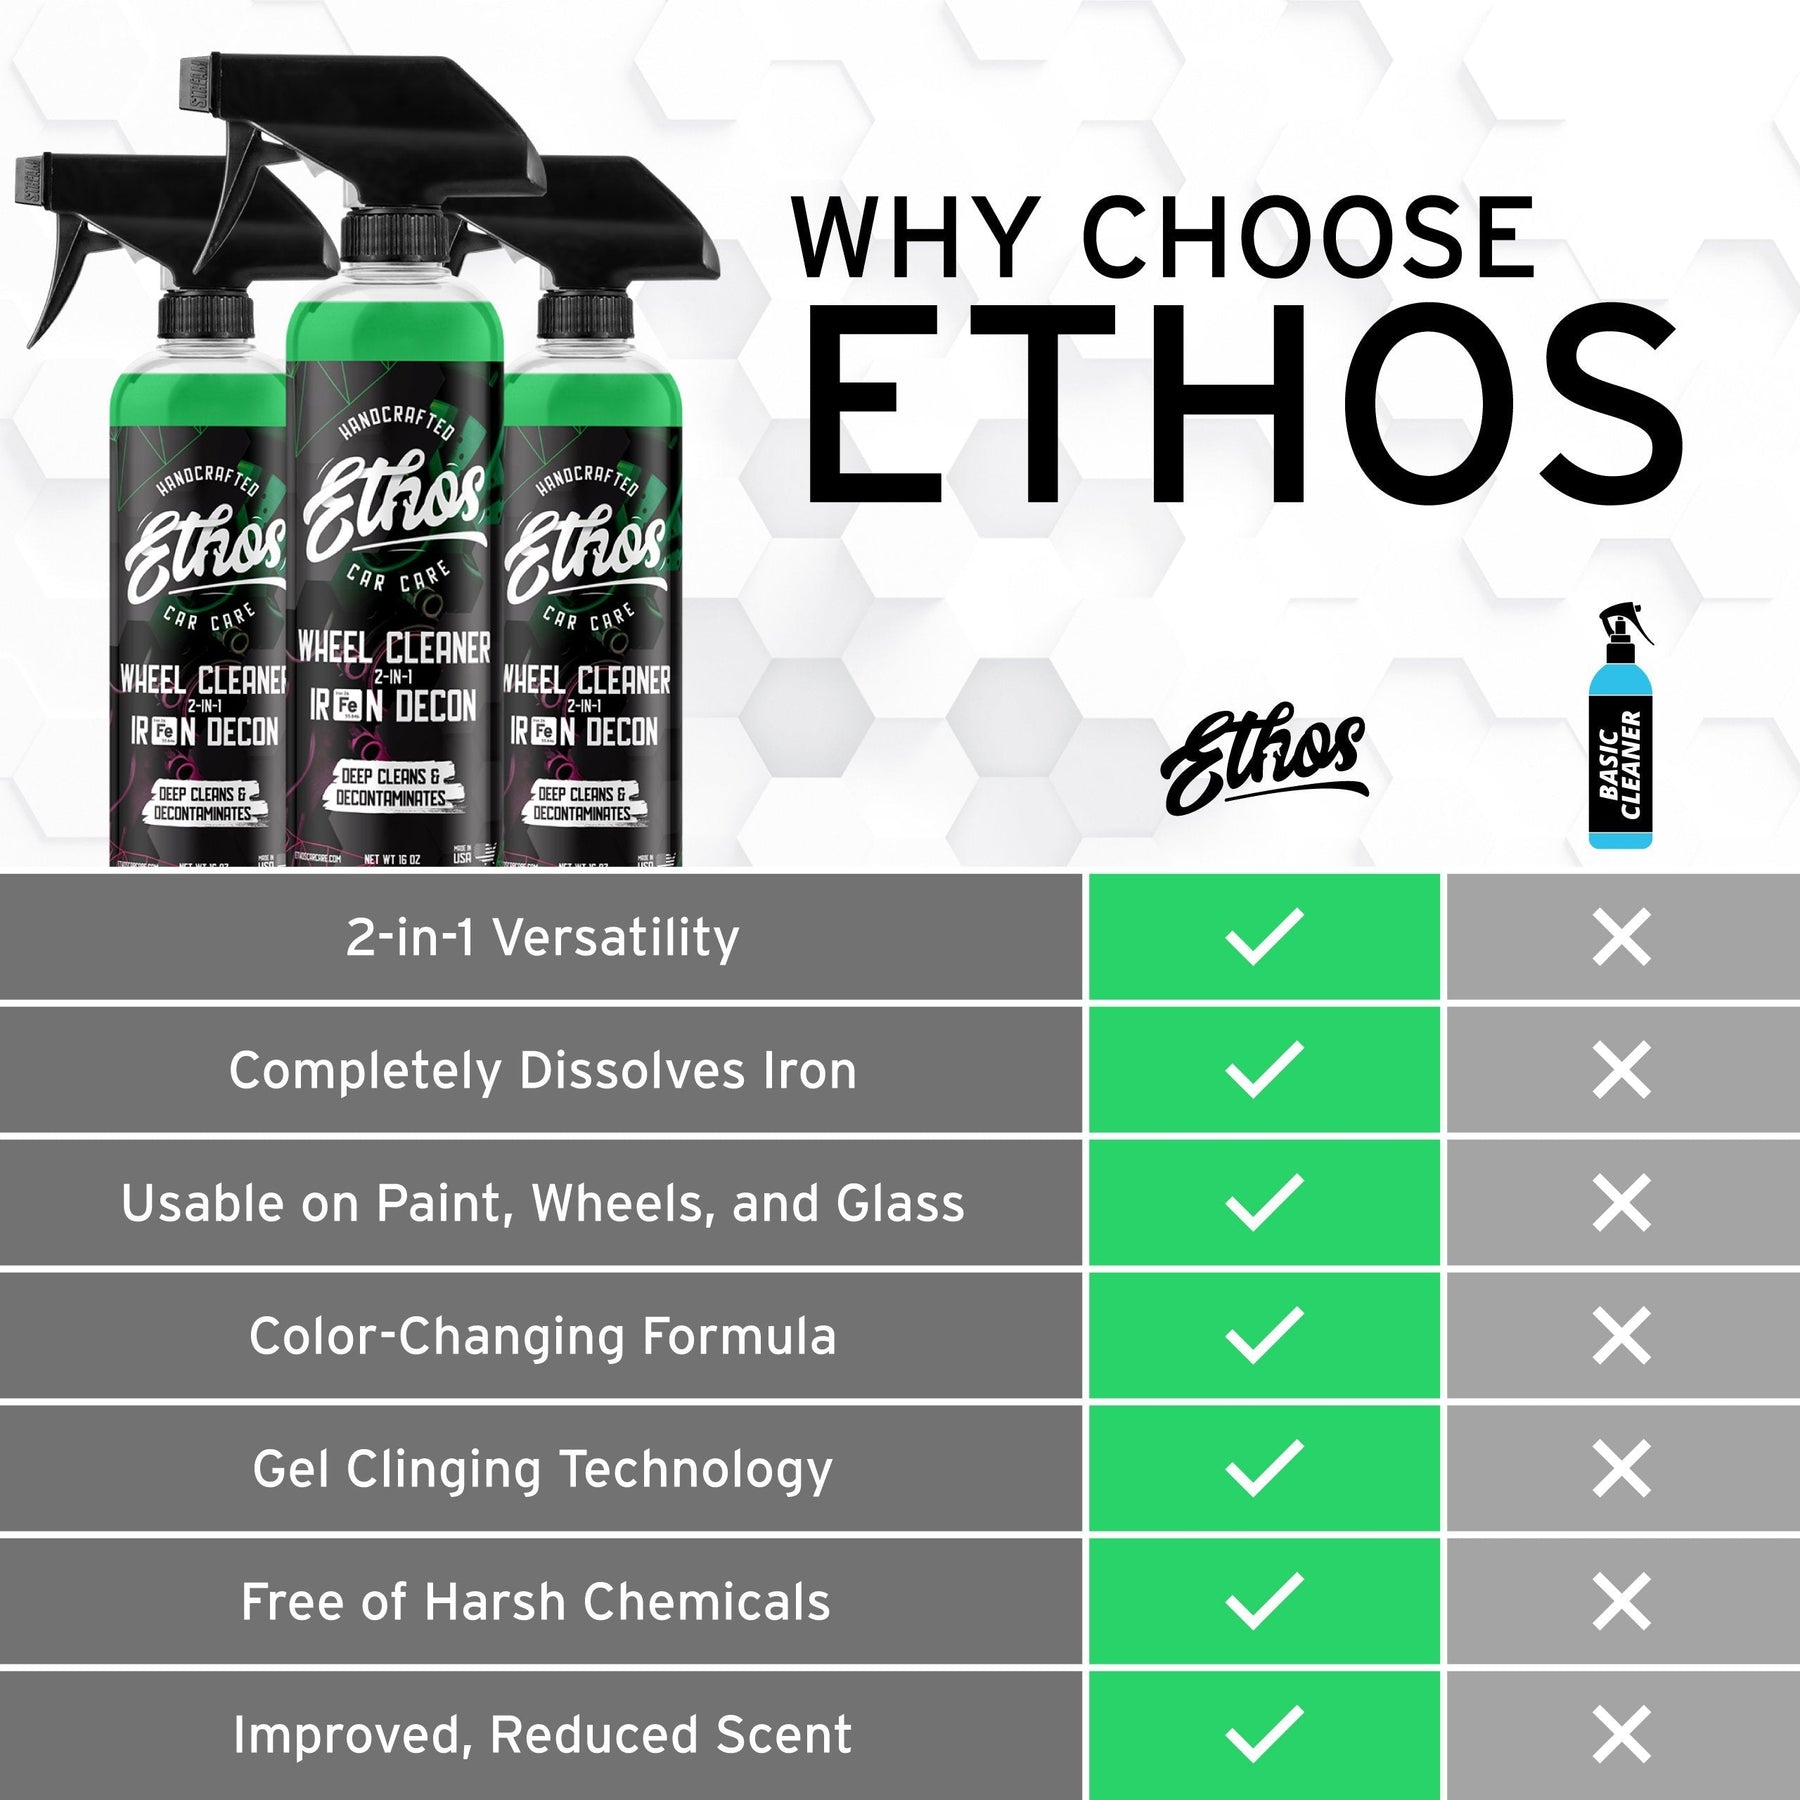 ethos_wheel_cleaner_iron_fallout_remover_comparison